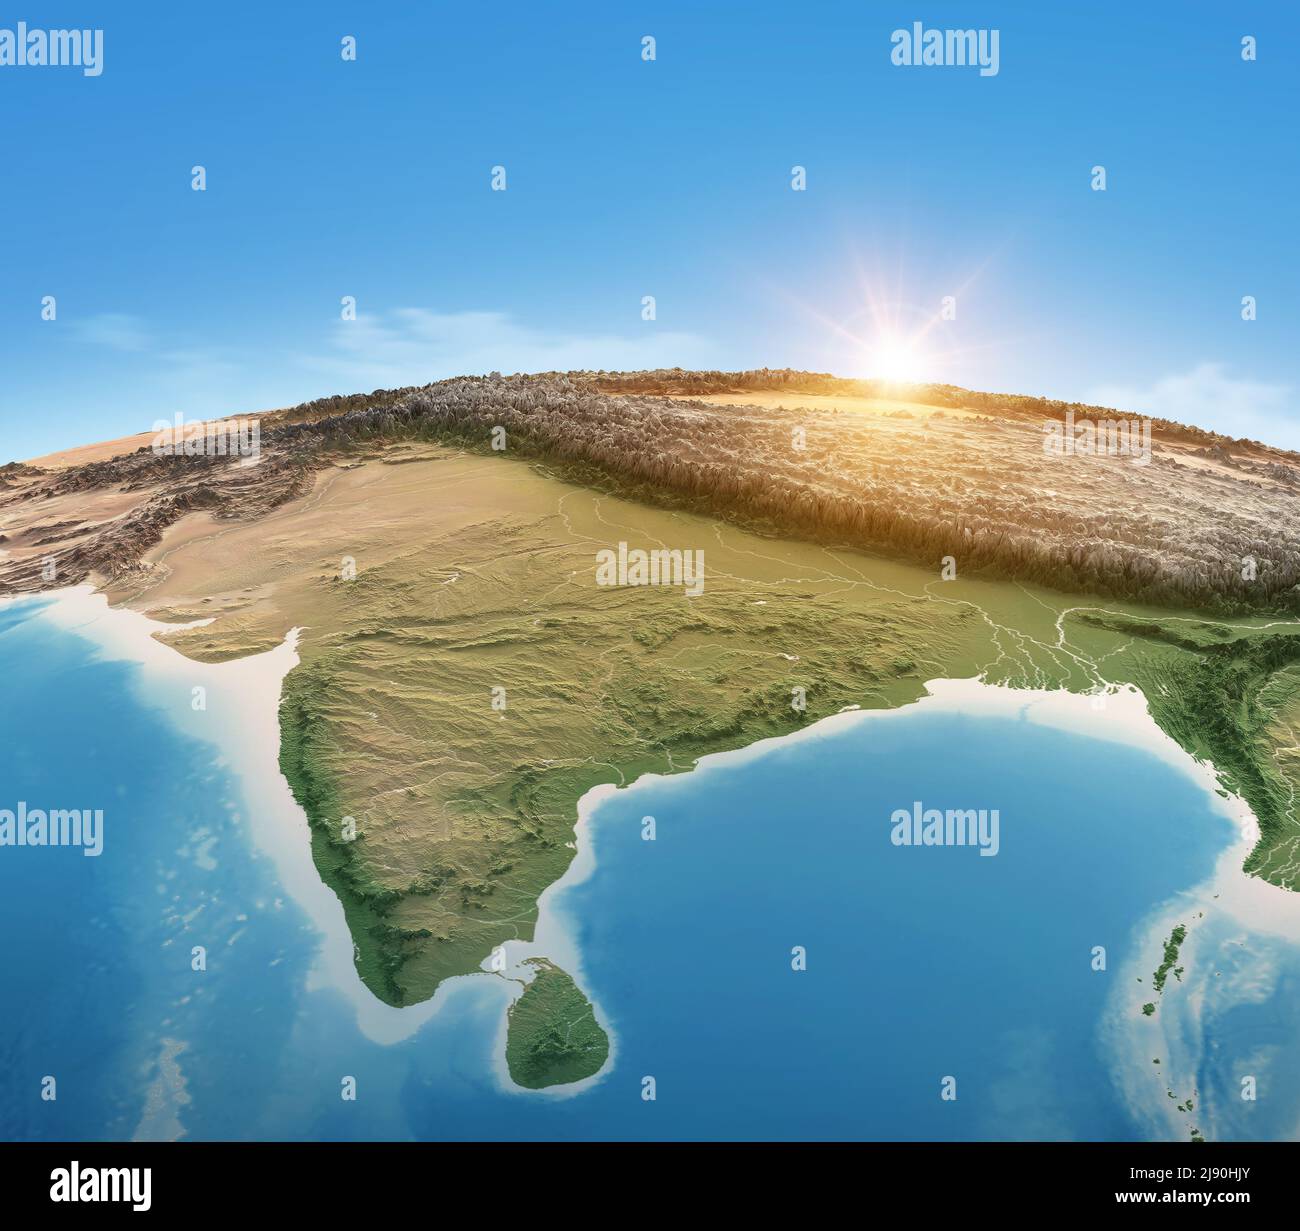 Physical map of Planet Earth, focused on India, South Asia. Satellite view, sun shining on the horizon. Elements furnished by NASA Stock Photo